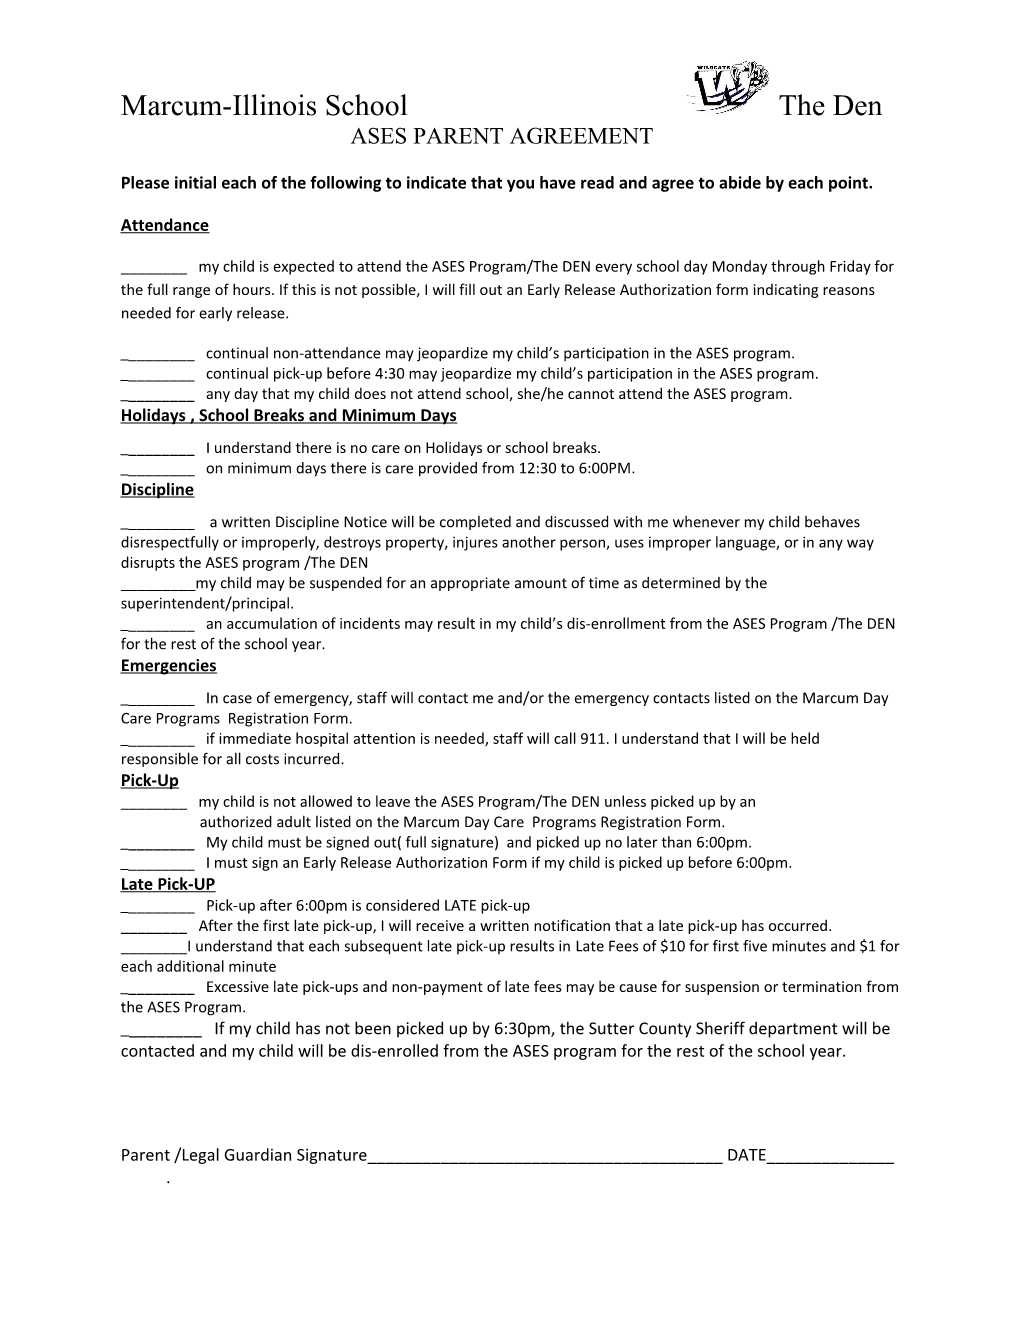 Ases Parent Agreement